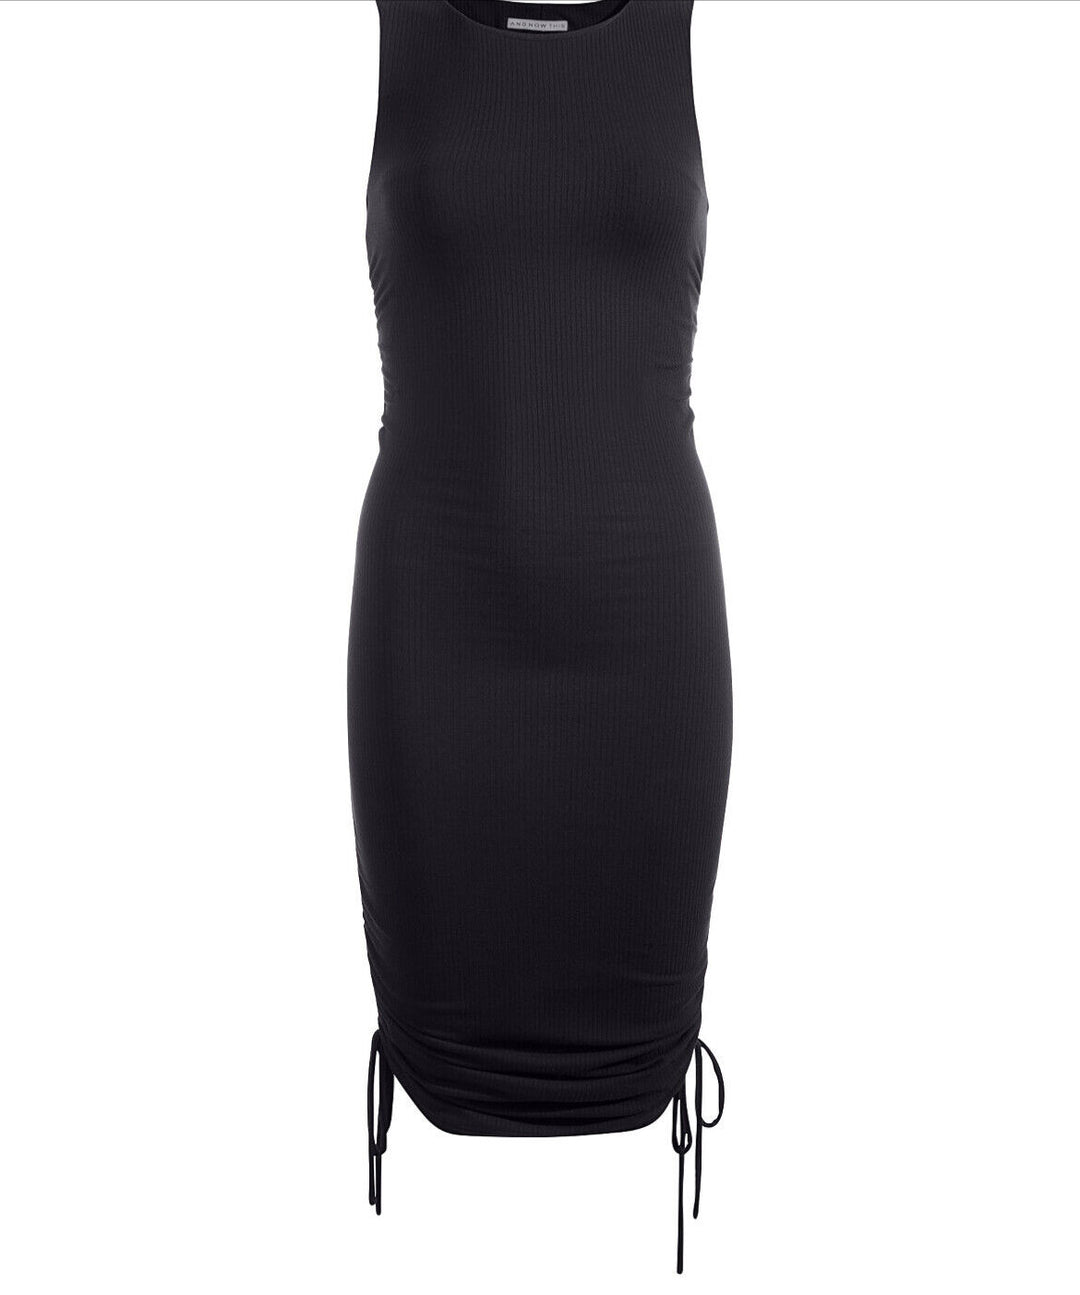 Women's Ribbed Side-Ruched Dress